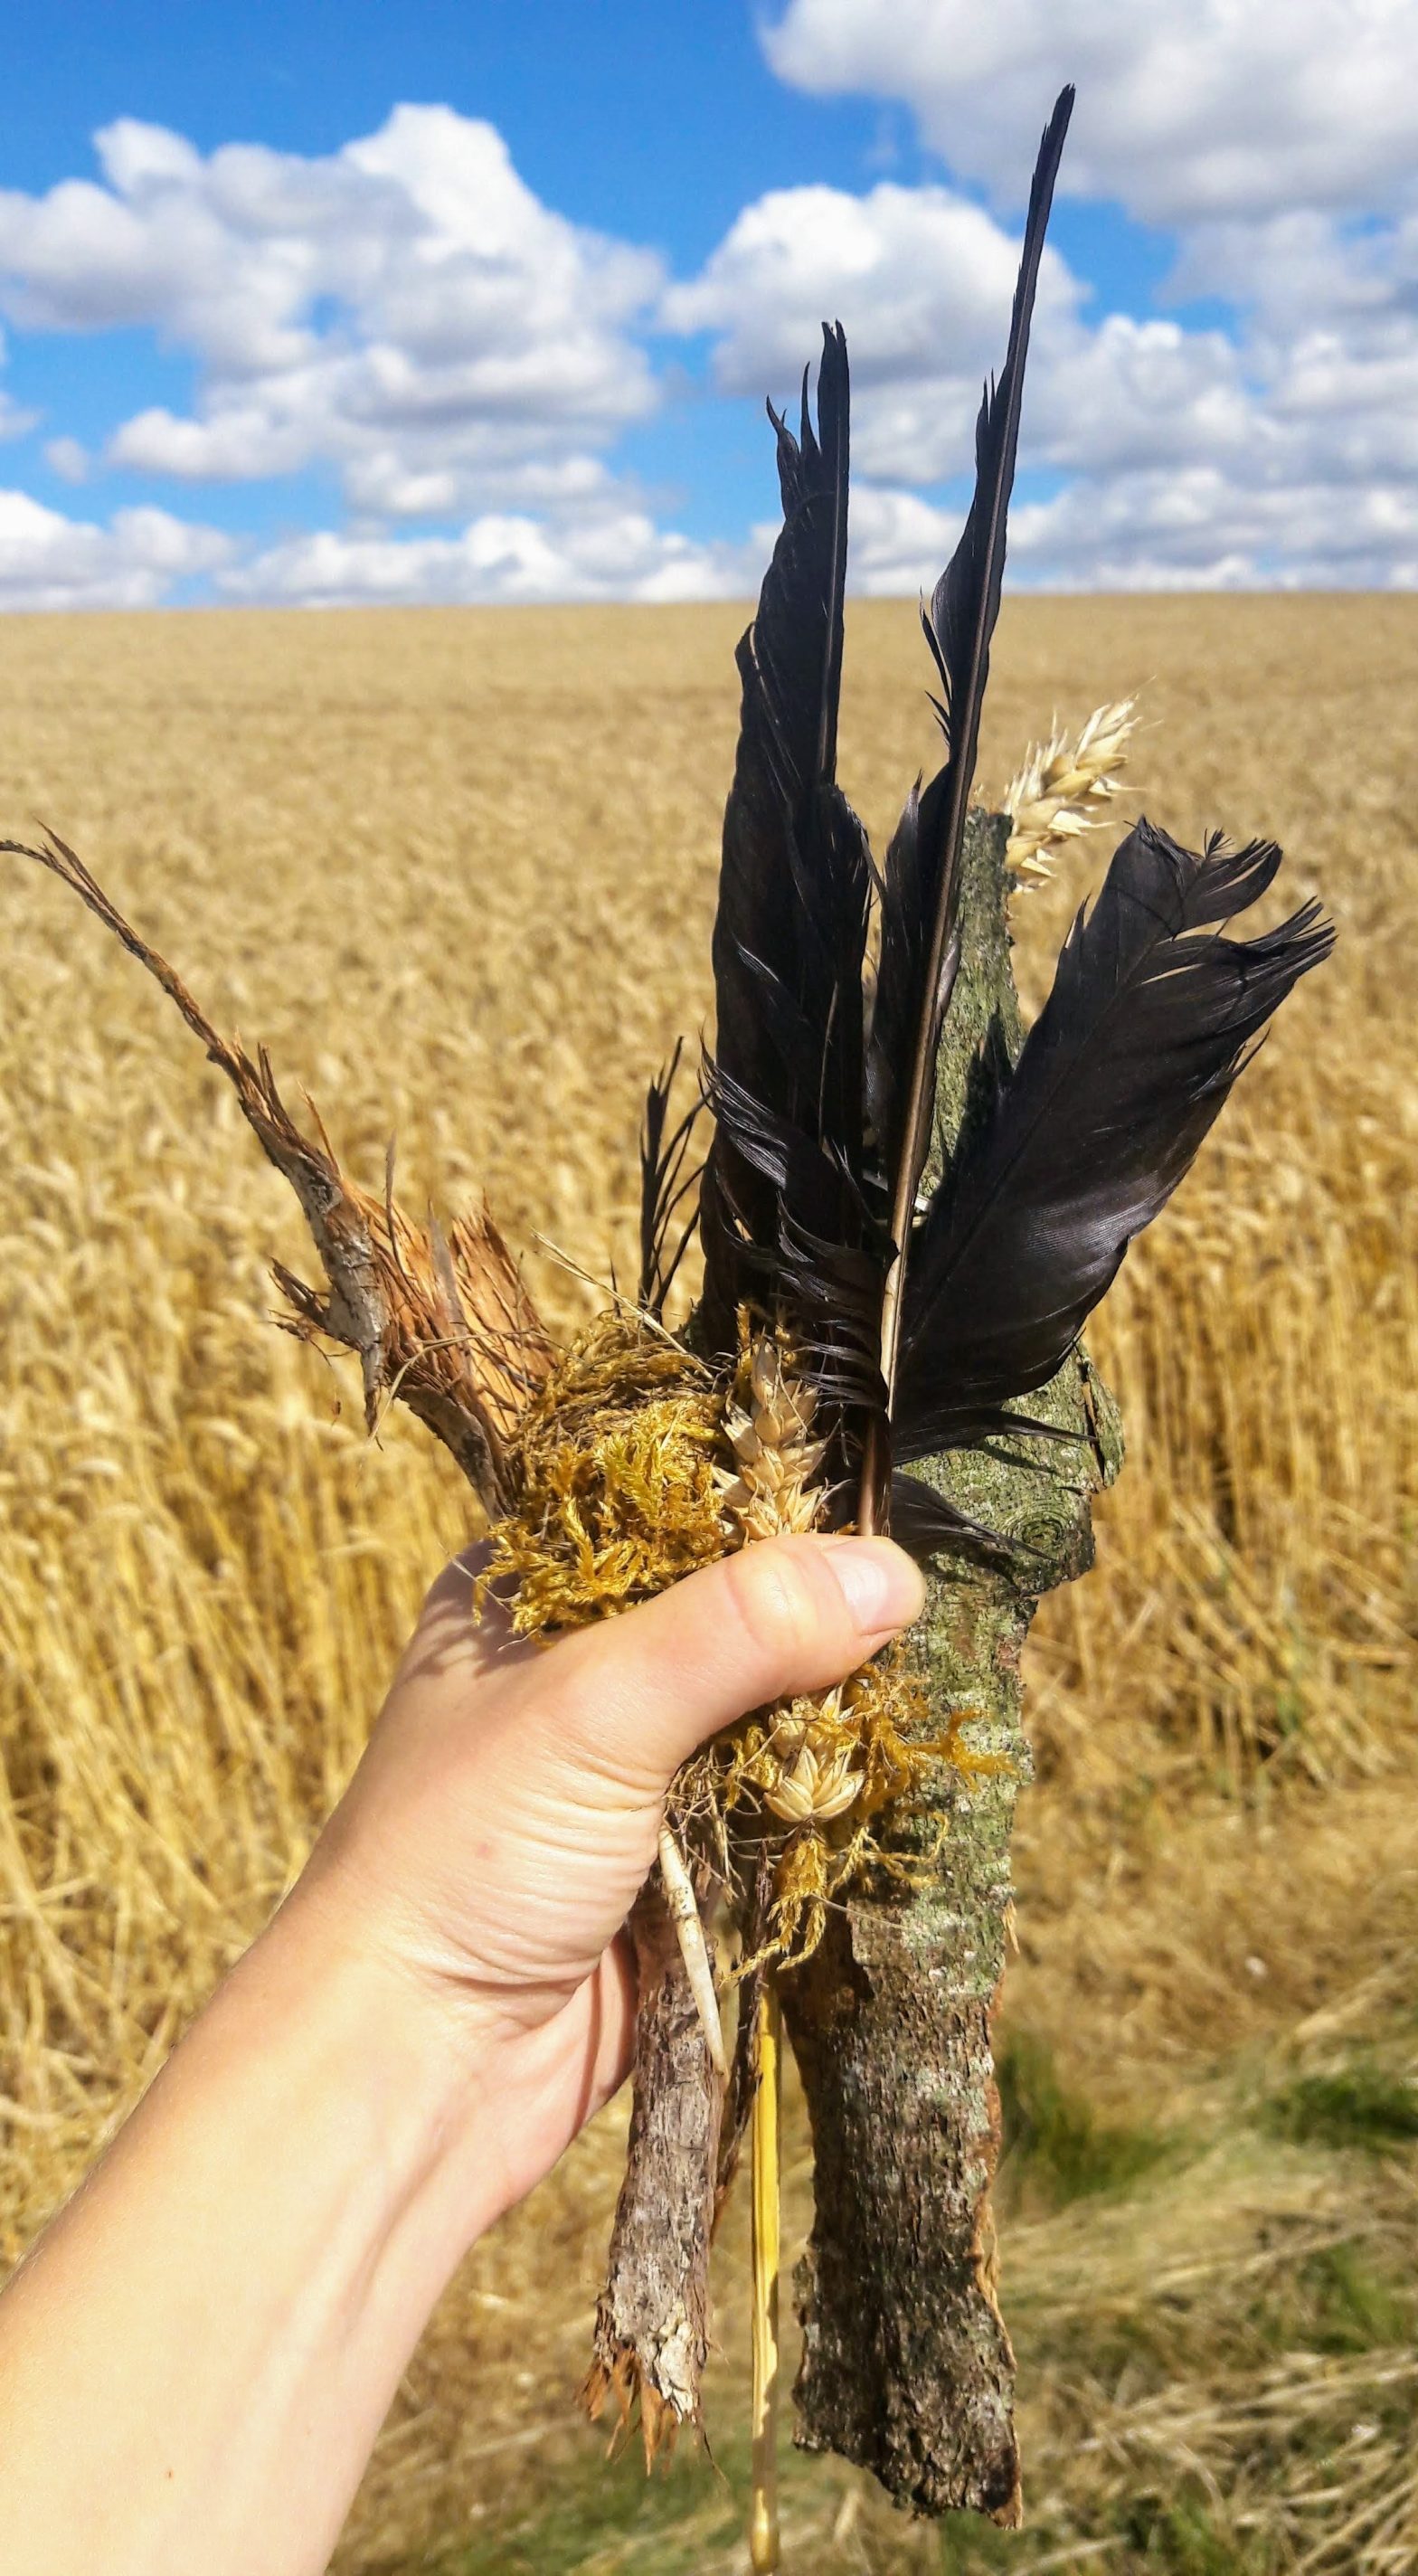 A hand holding a bunch of bark, twigs and feathers against the backdrop of a wheat field. Above the field is a bright blue sky with white clouds.